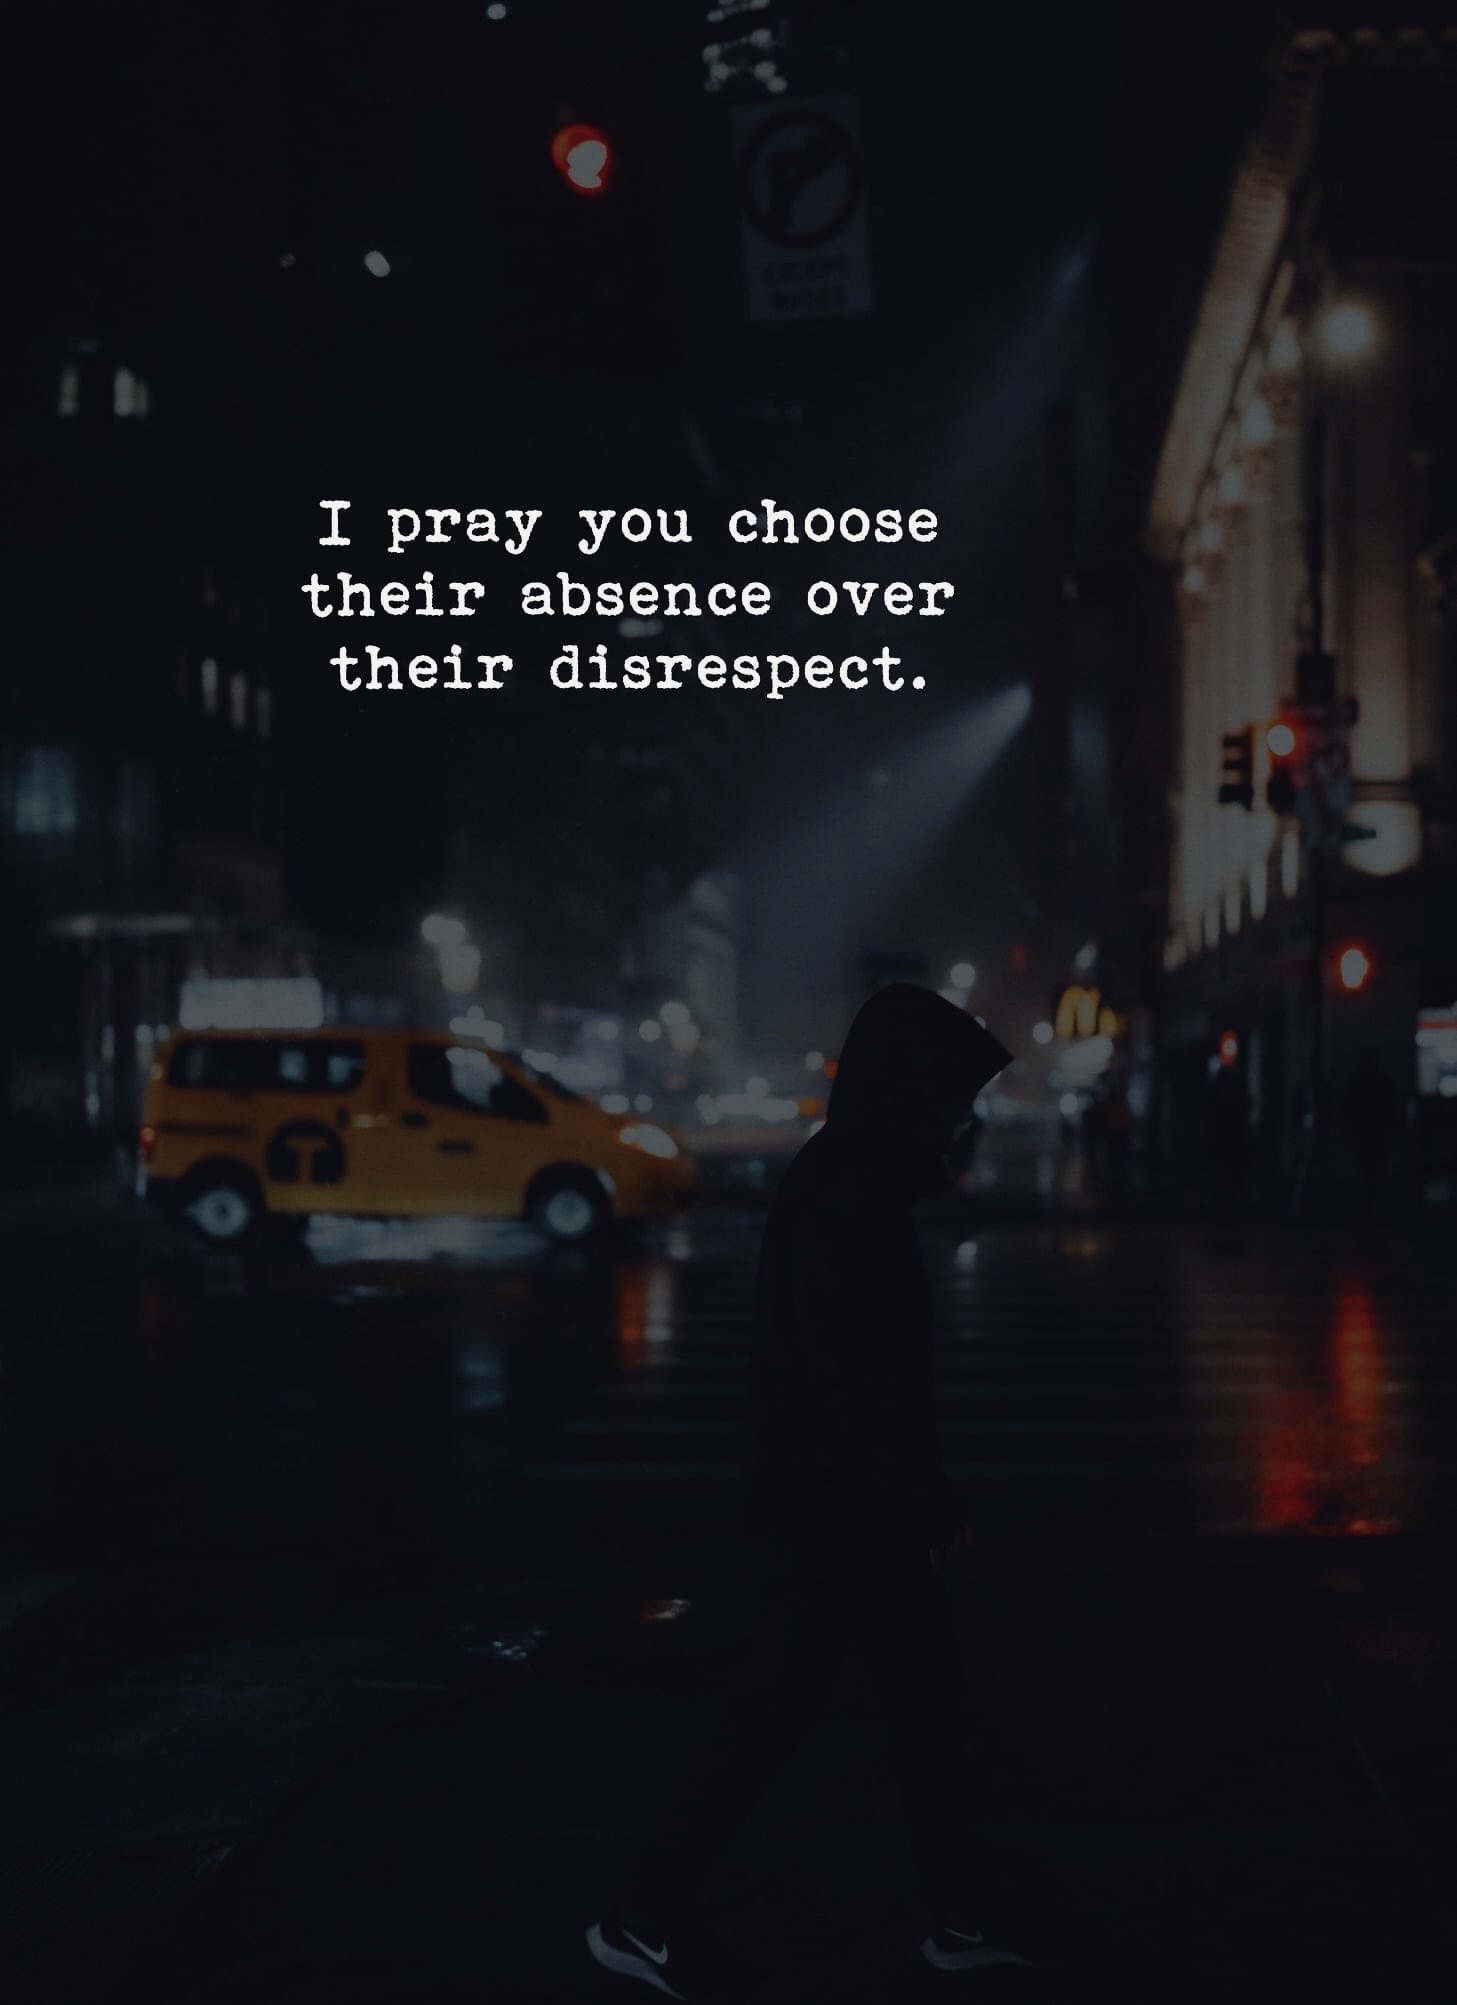 I pray you choose their absence over their disrespect.